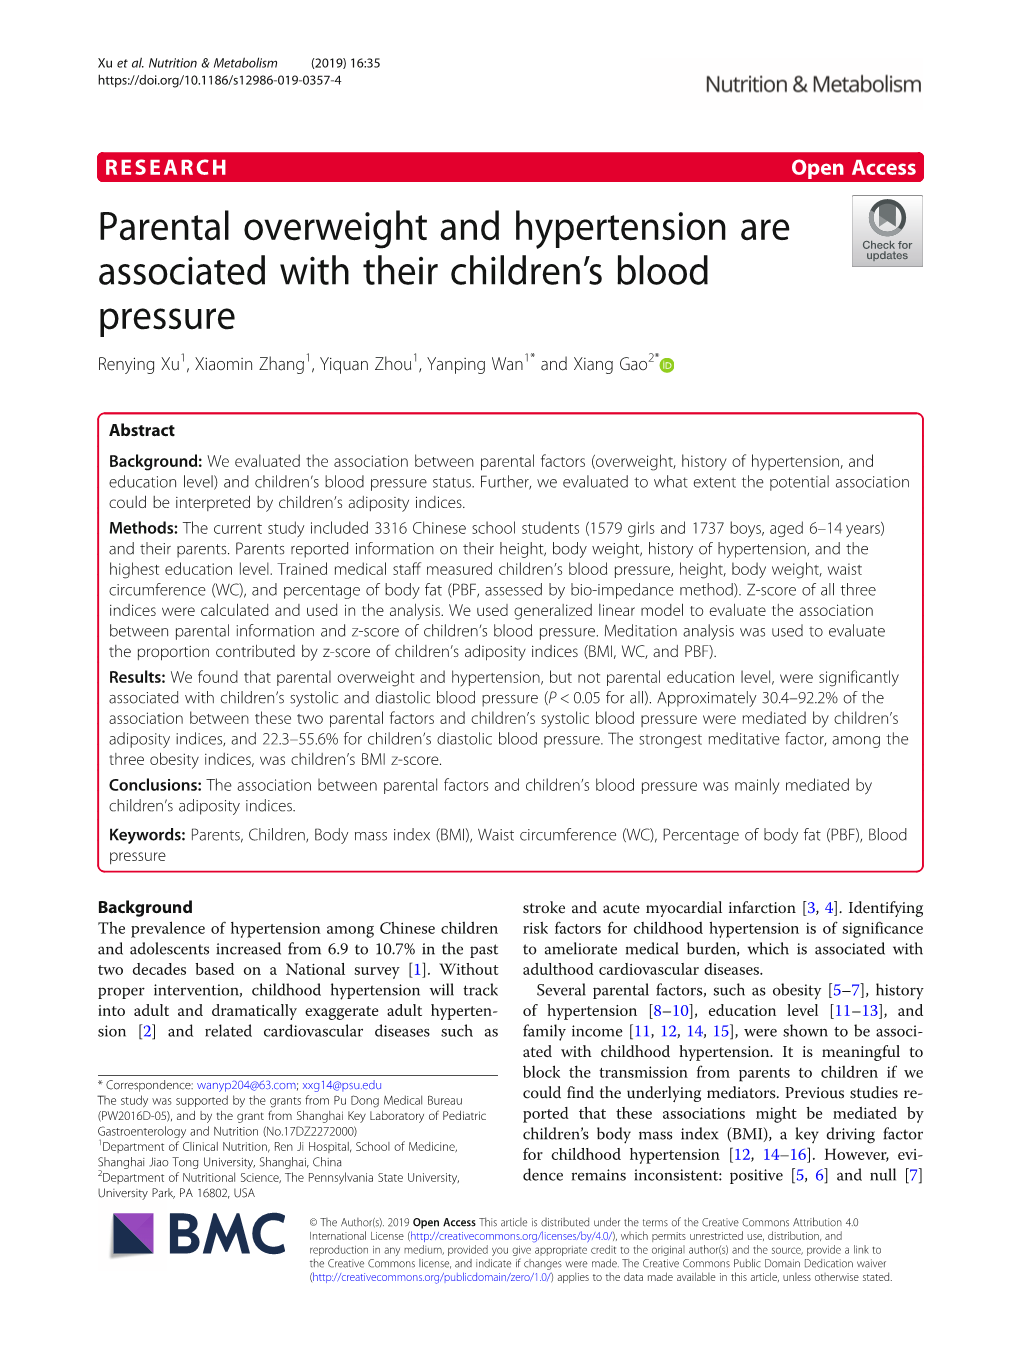 Parental Overweight and Hypertension Are Associated with Their Children's